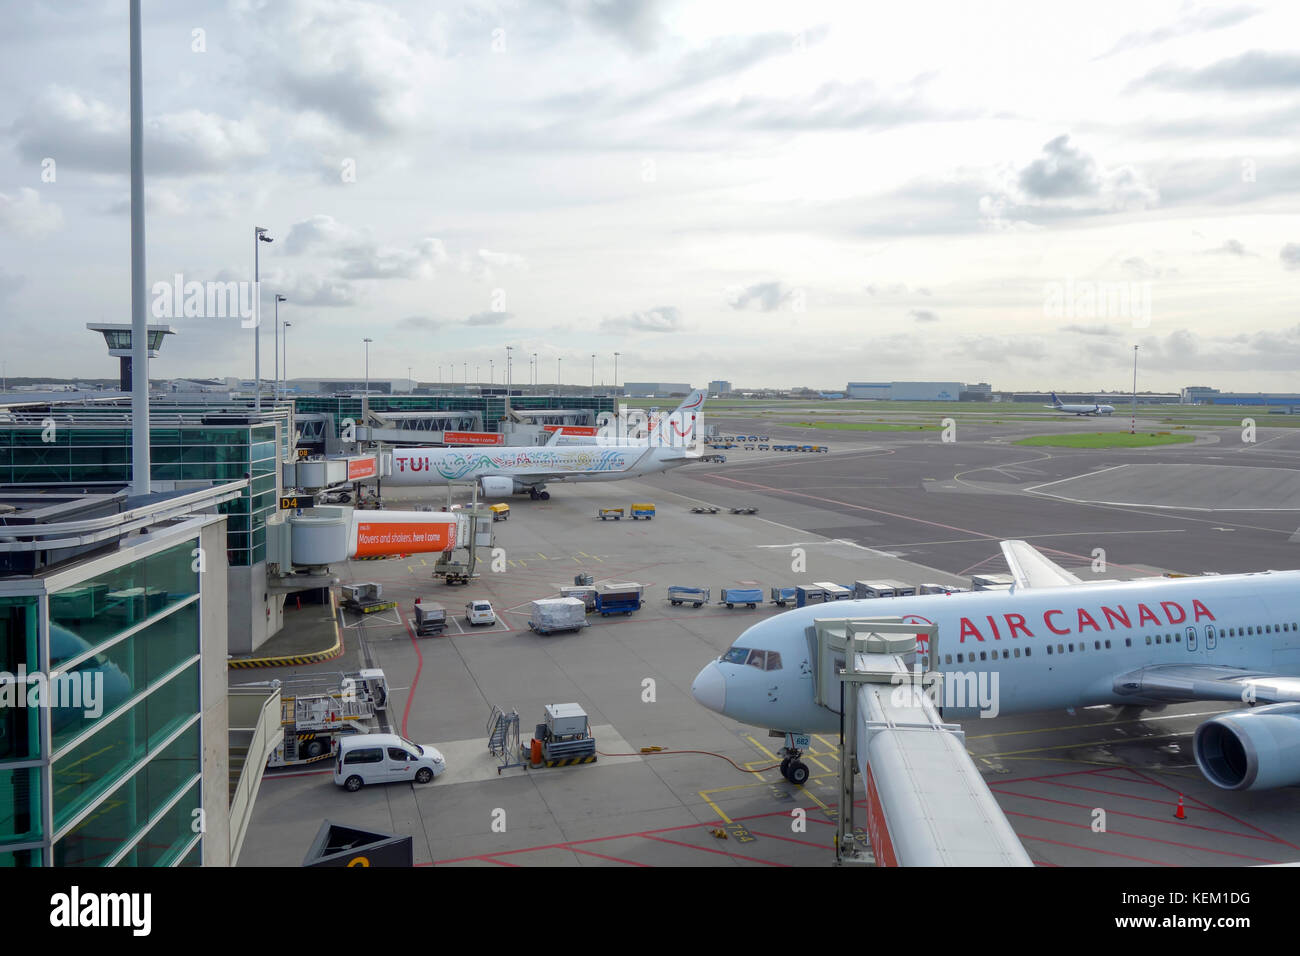 Air Canada and TUI aircraft on the runway awaiting departure at Amsterdam Schiphol Airport Stock Photo